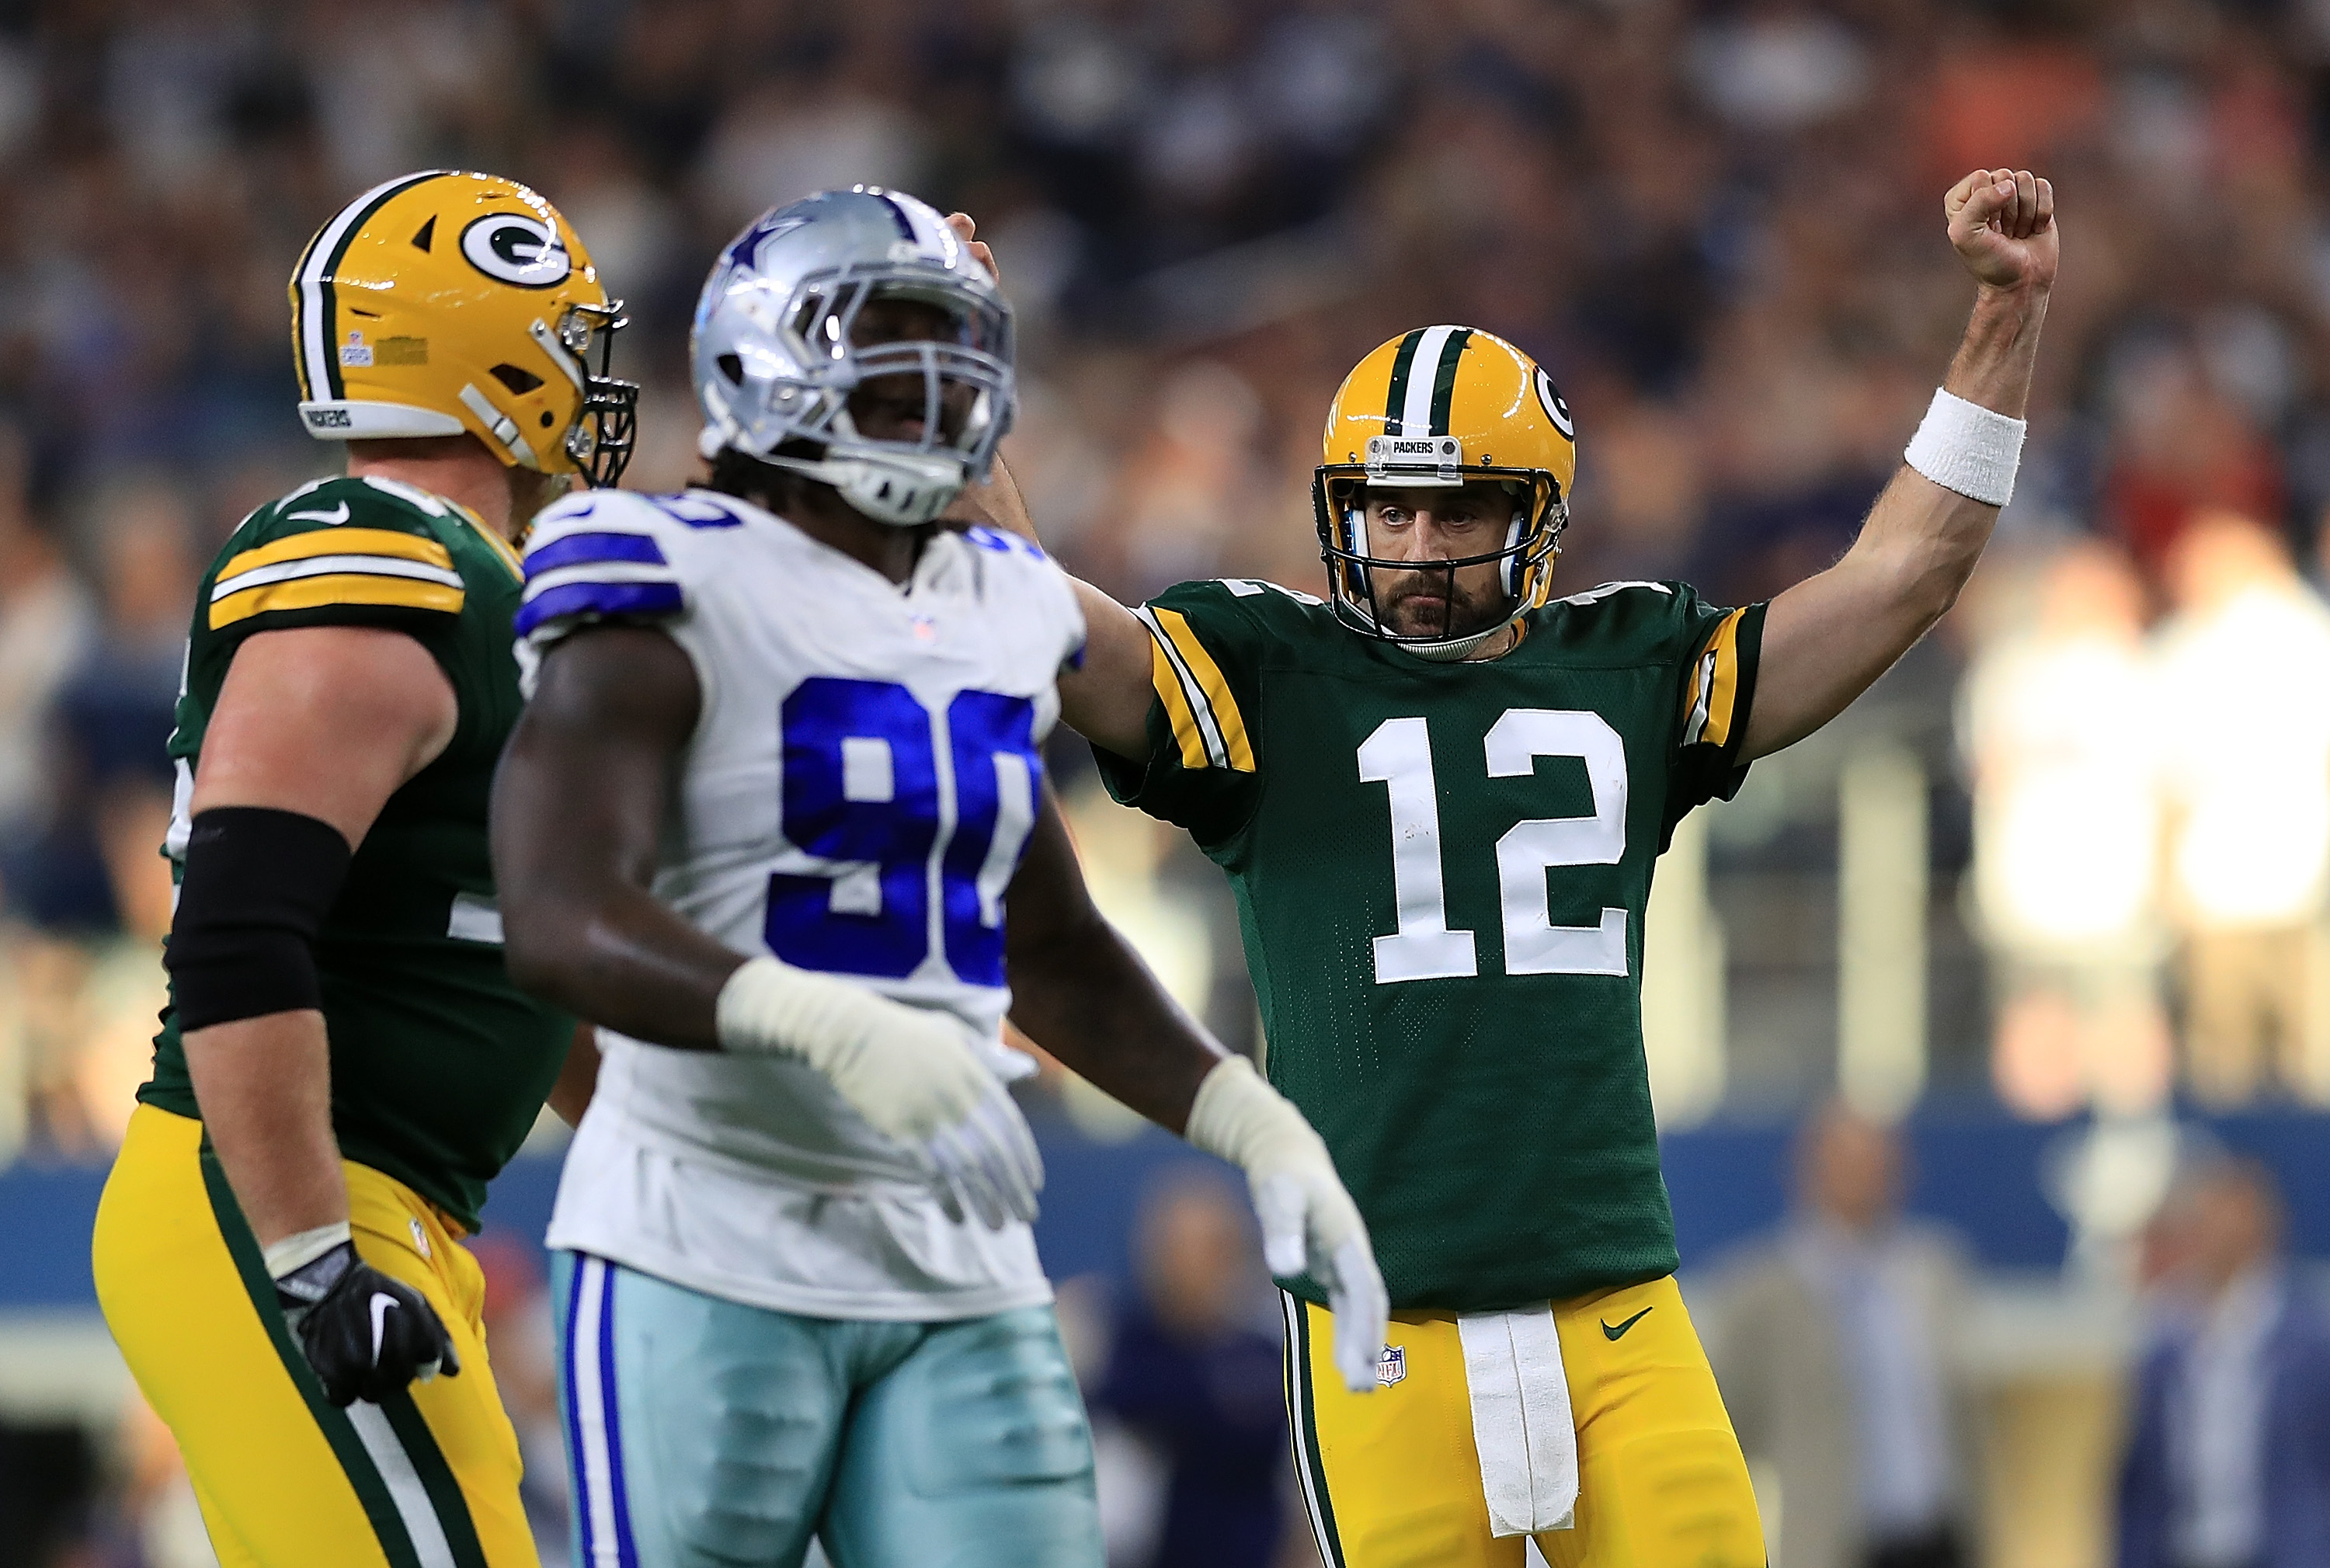 Dallas Cowboys Collapse, Lose in OT to Green Bay Packers at Lam